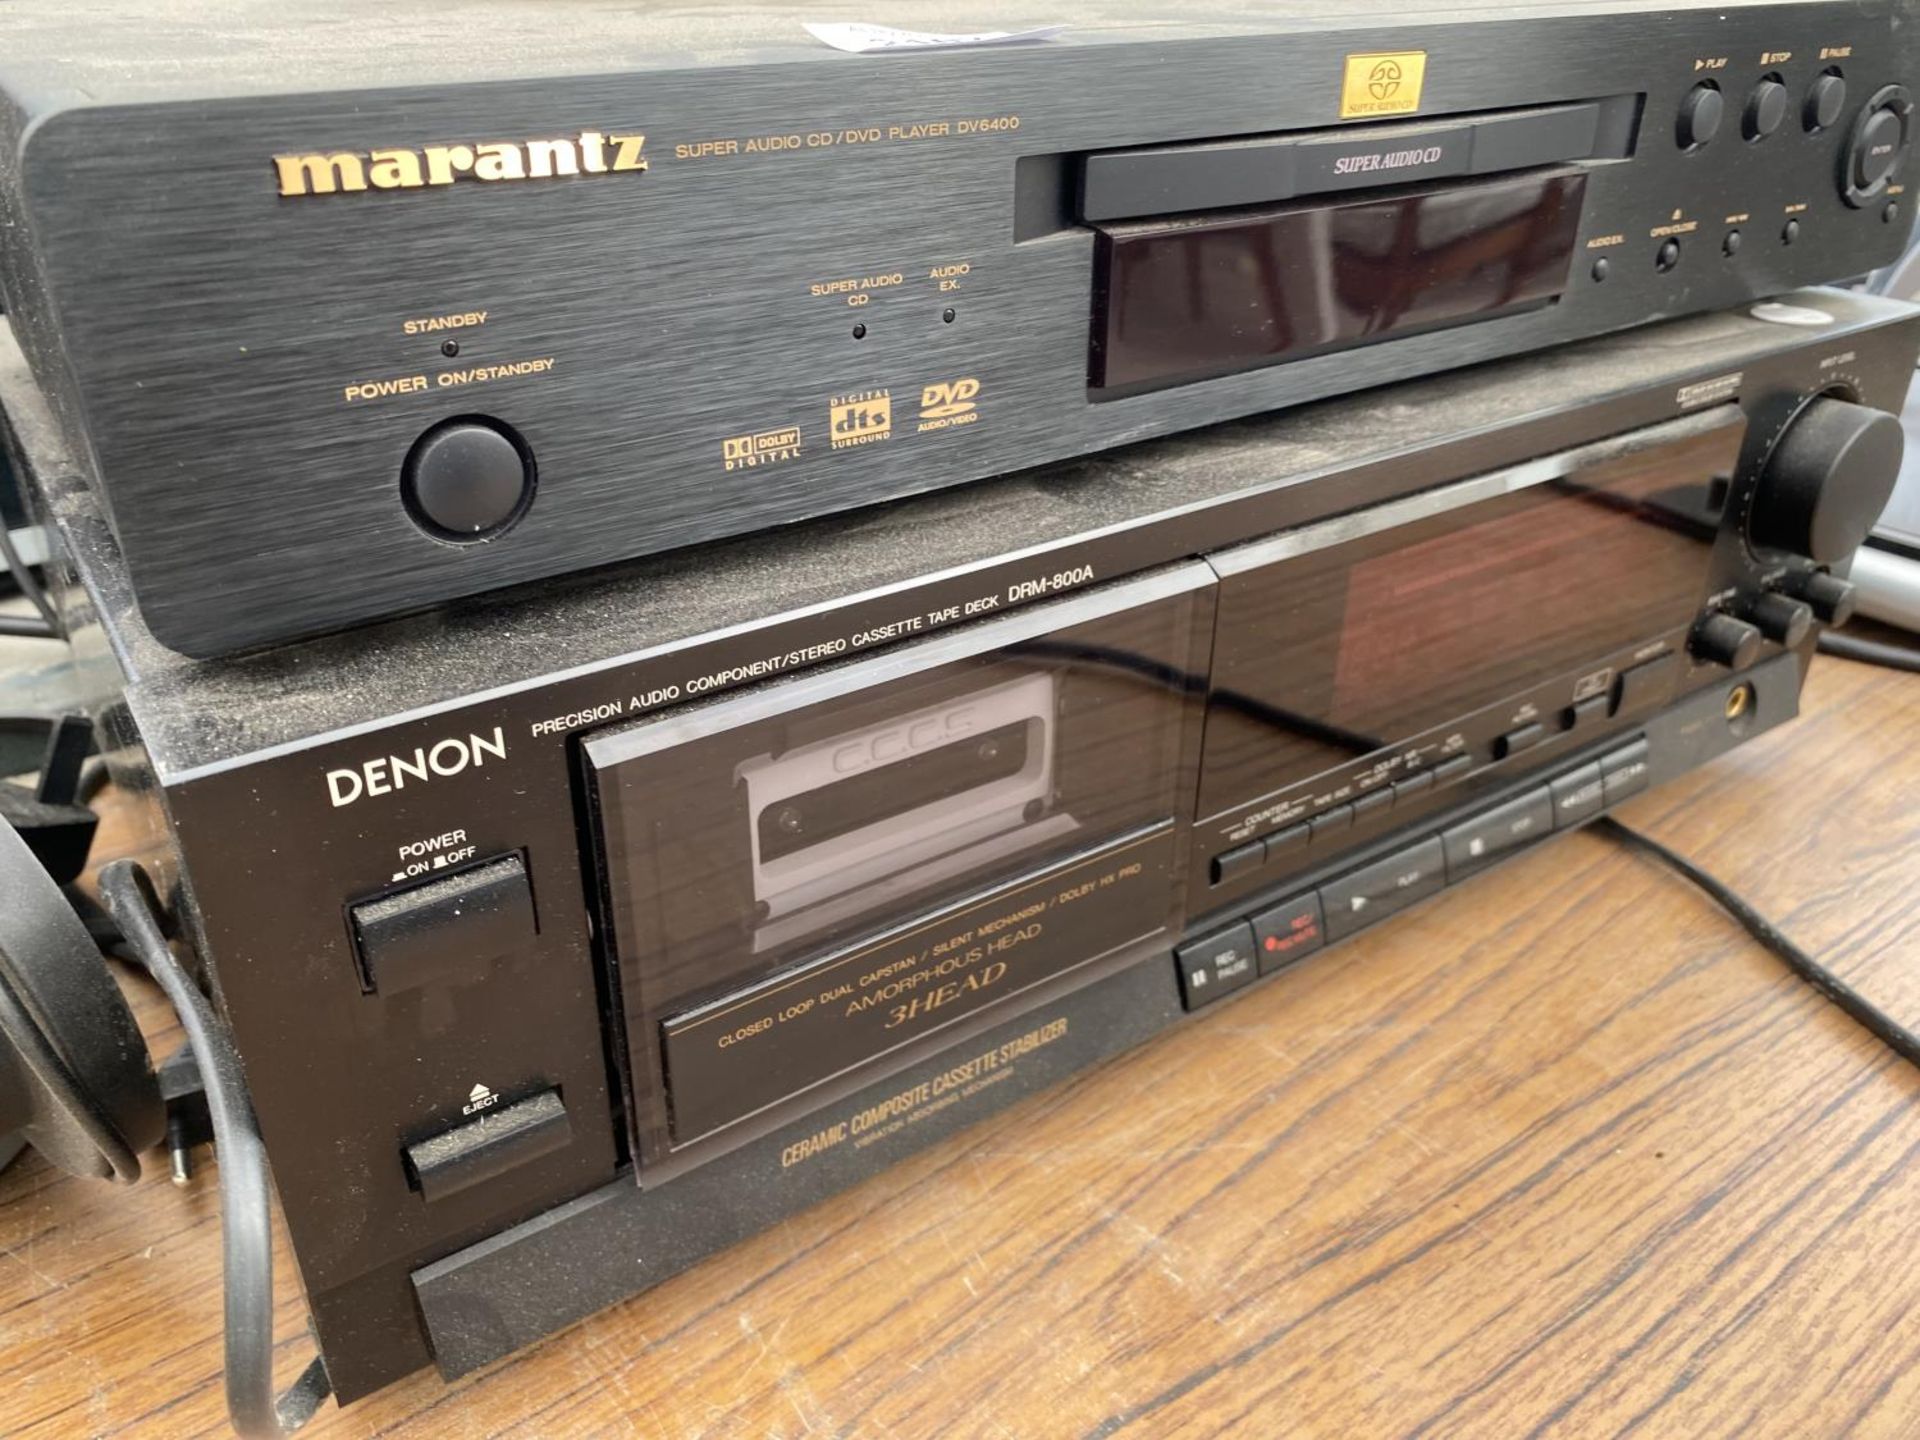 TWO ITEMS TO INCLUDE A DENON CASSETTE PLAYER AND A MARANTZ AUDIO AND DVD PLAYER - Image 2 of 2